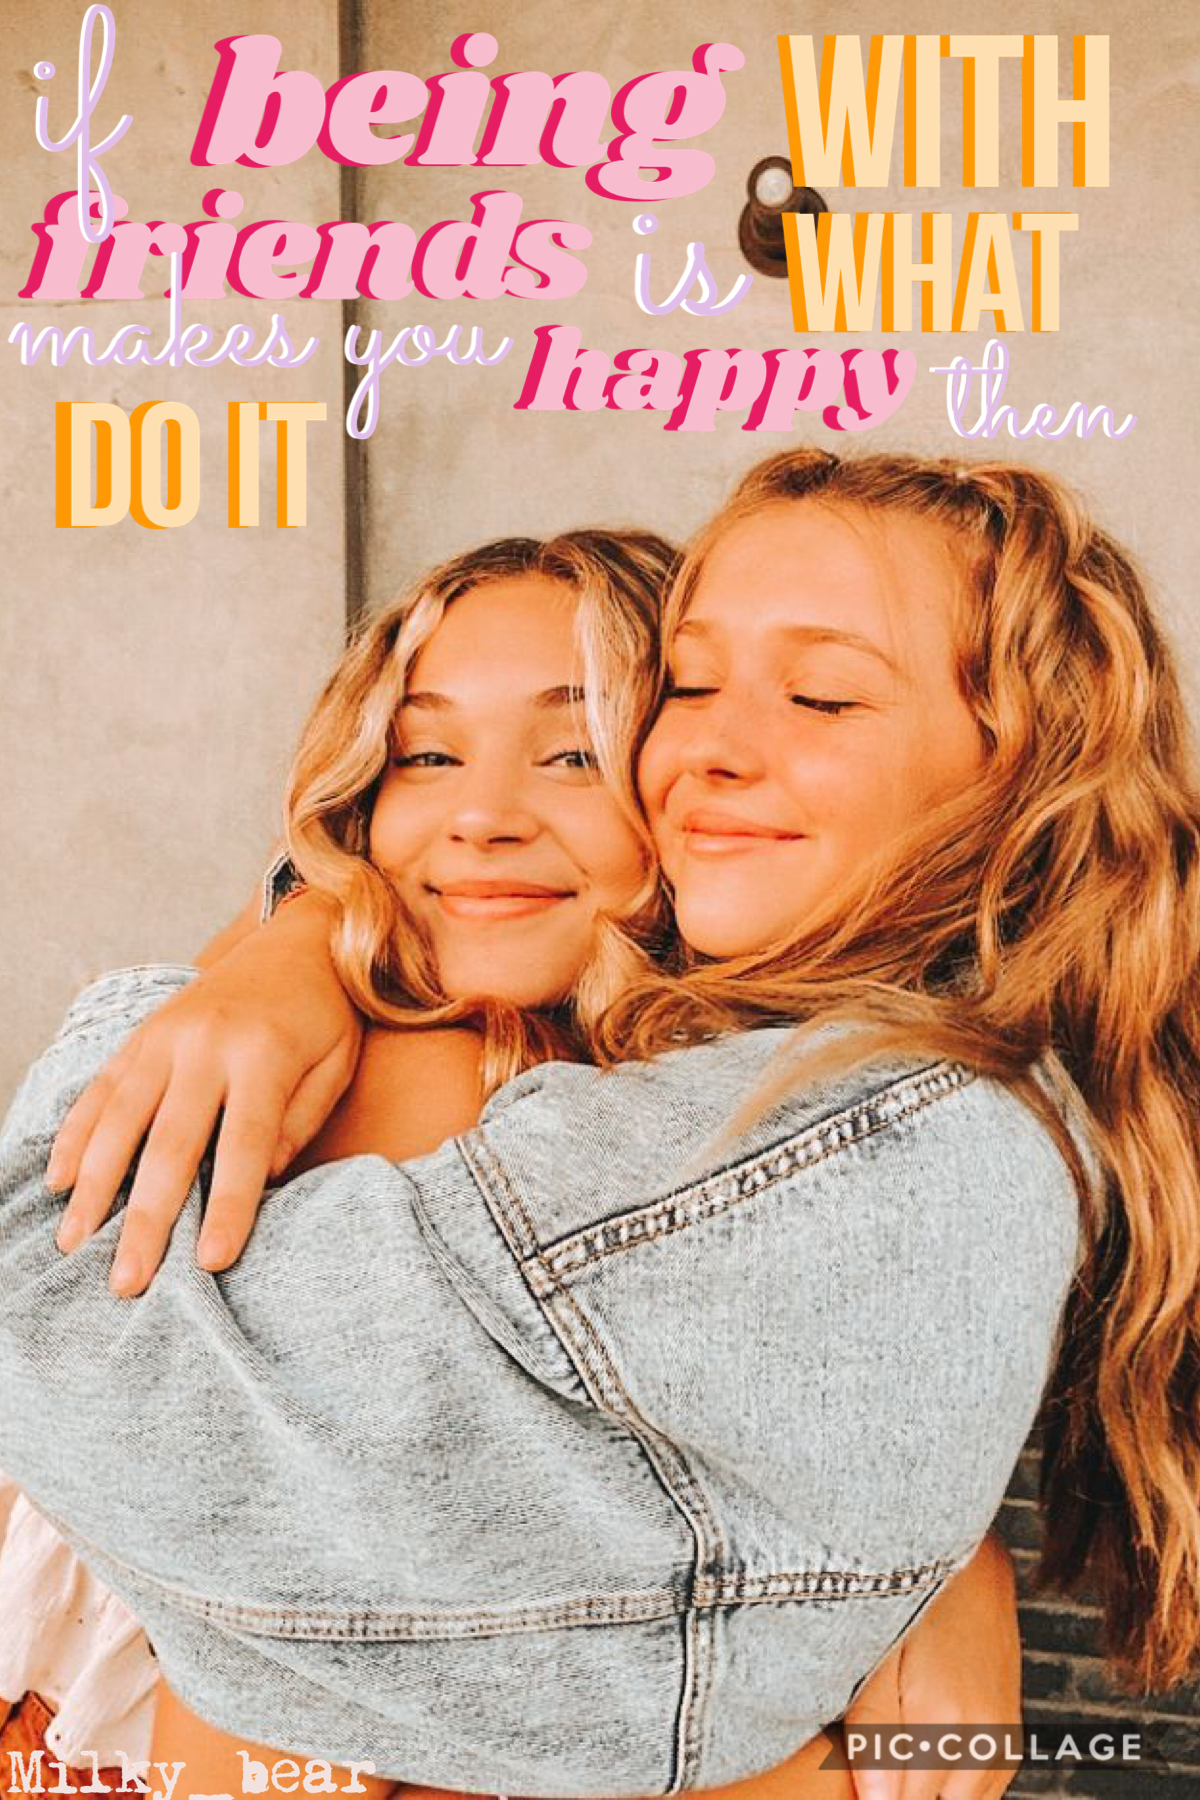 ✨TAP✨
QOTD: Whats your favourite quote / put it in comments 
“If being with friends is what makes you happy than do it” 